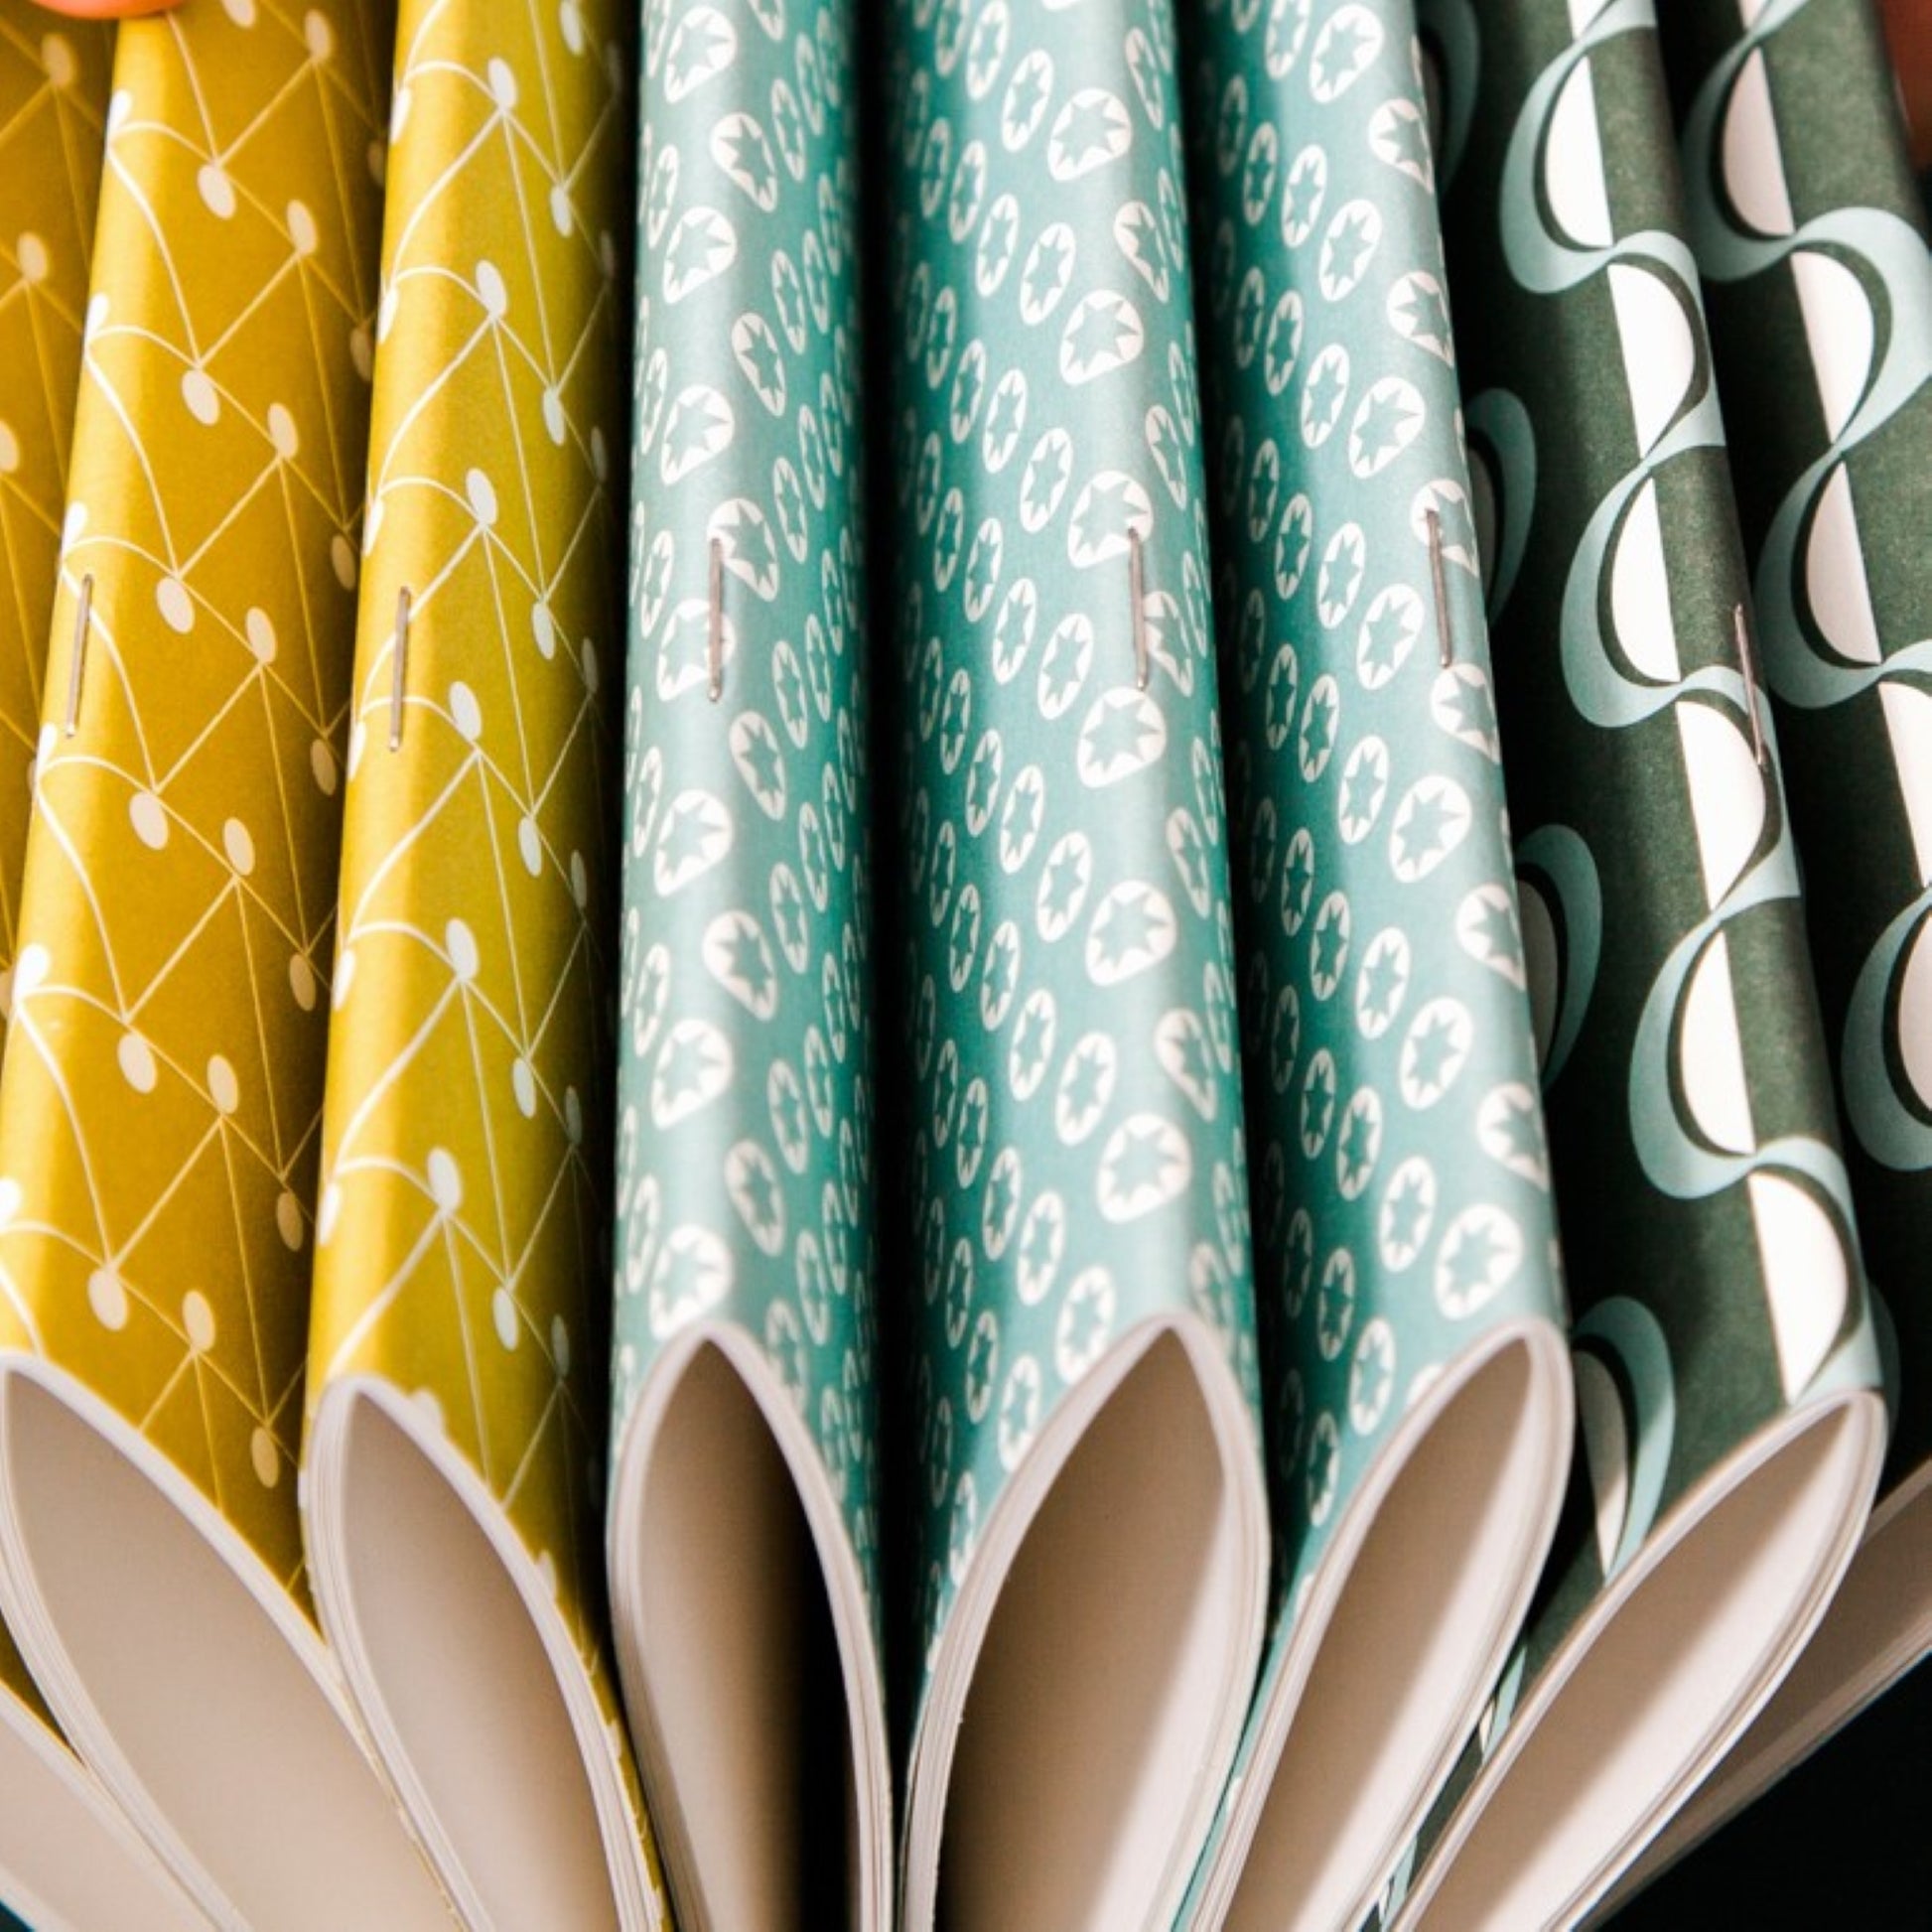 Soft cover pocket notebooks by Ola Studio in different patterned covers